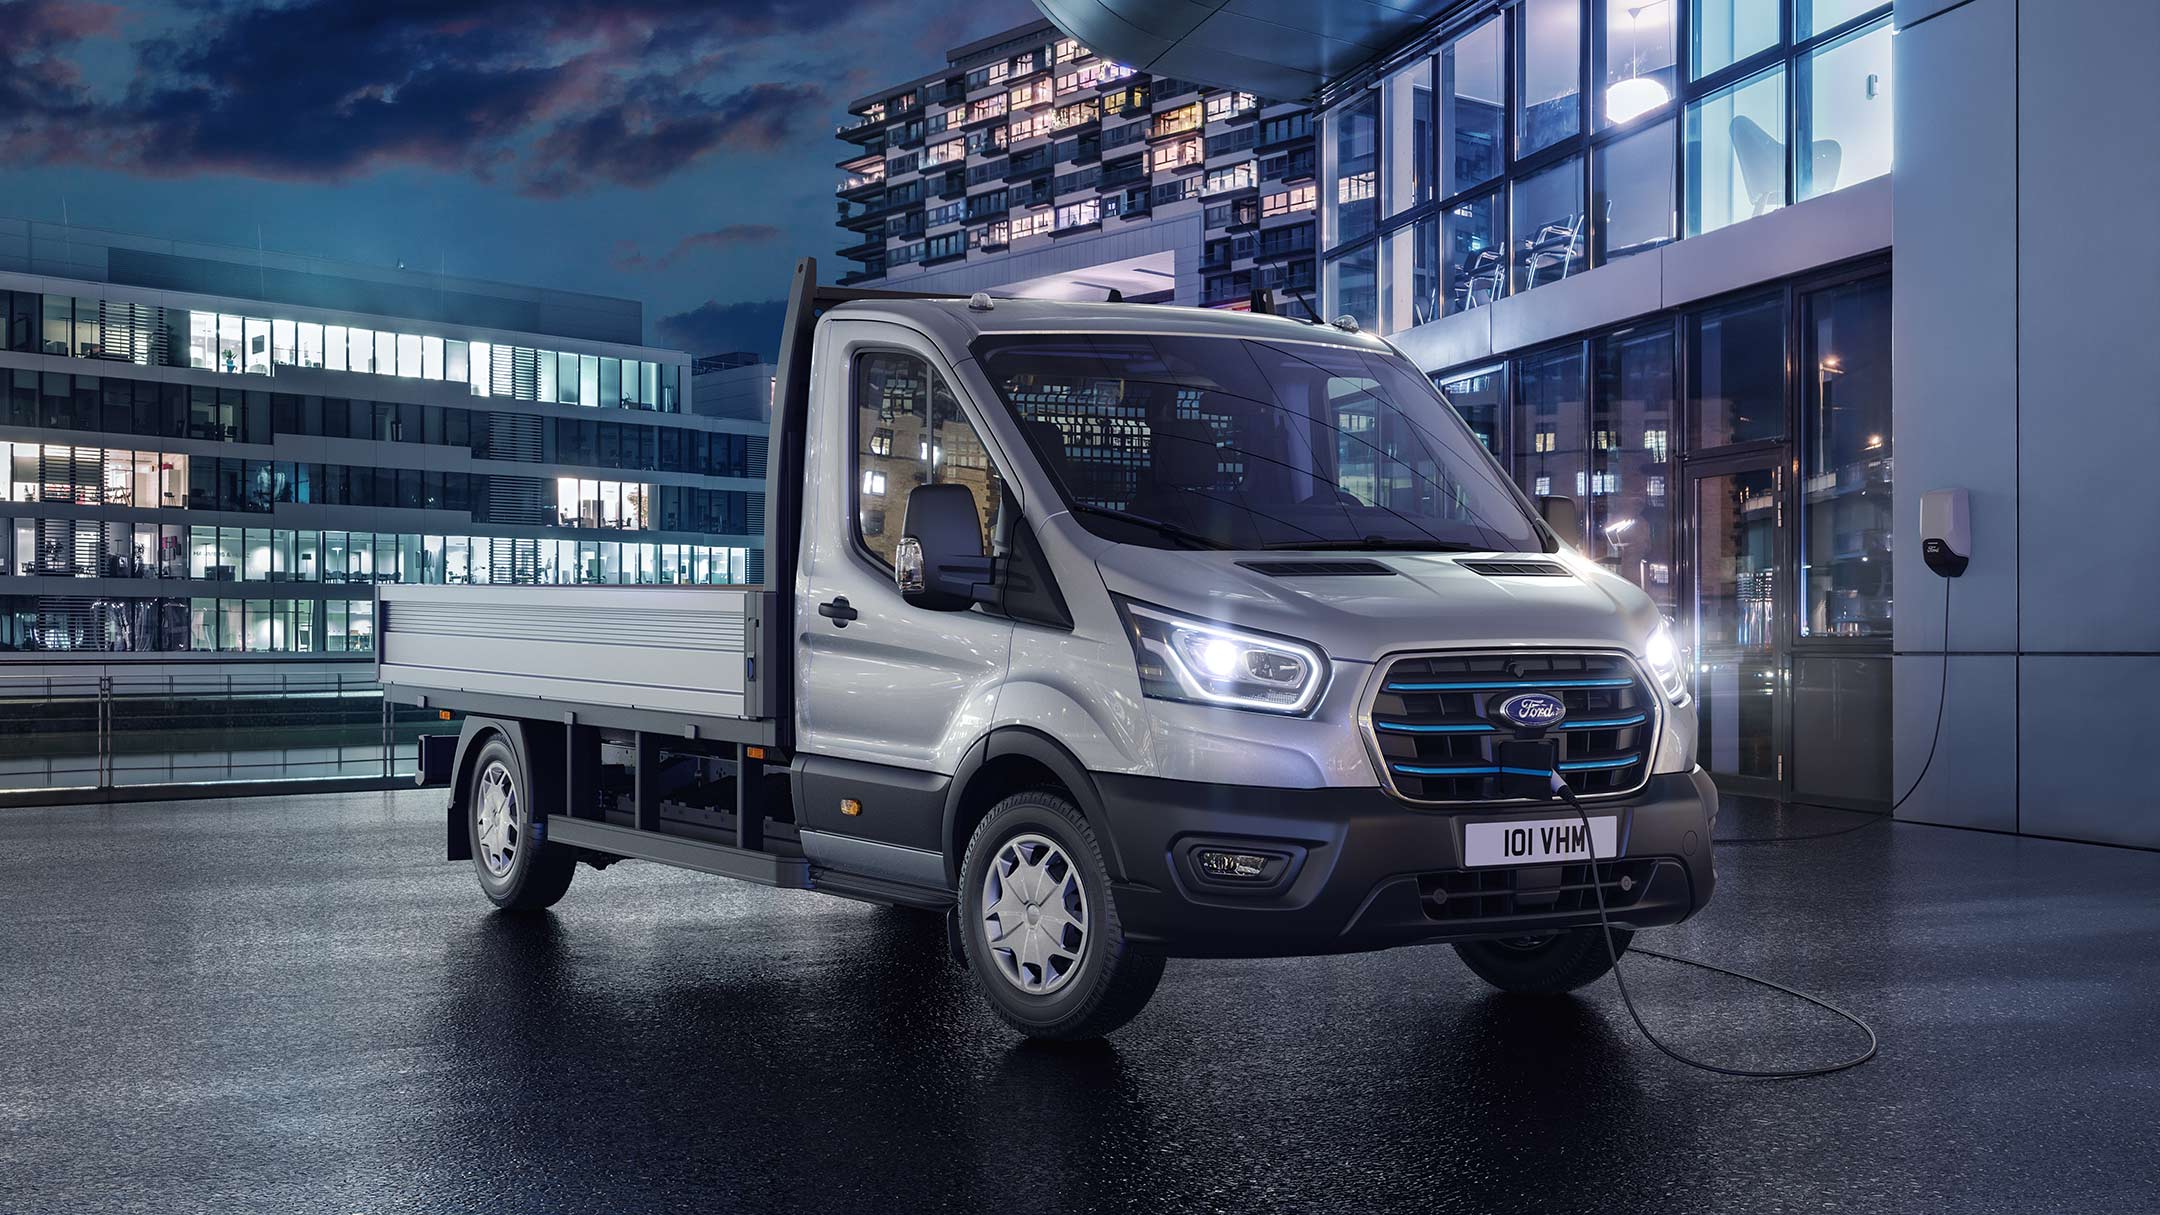 Ford E-Transit Chassis Cab conversiones